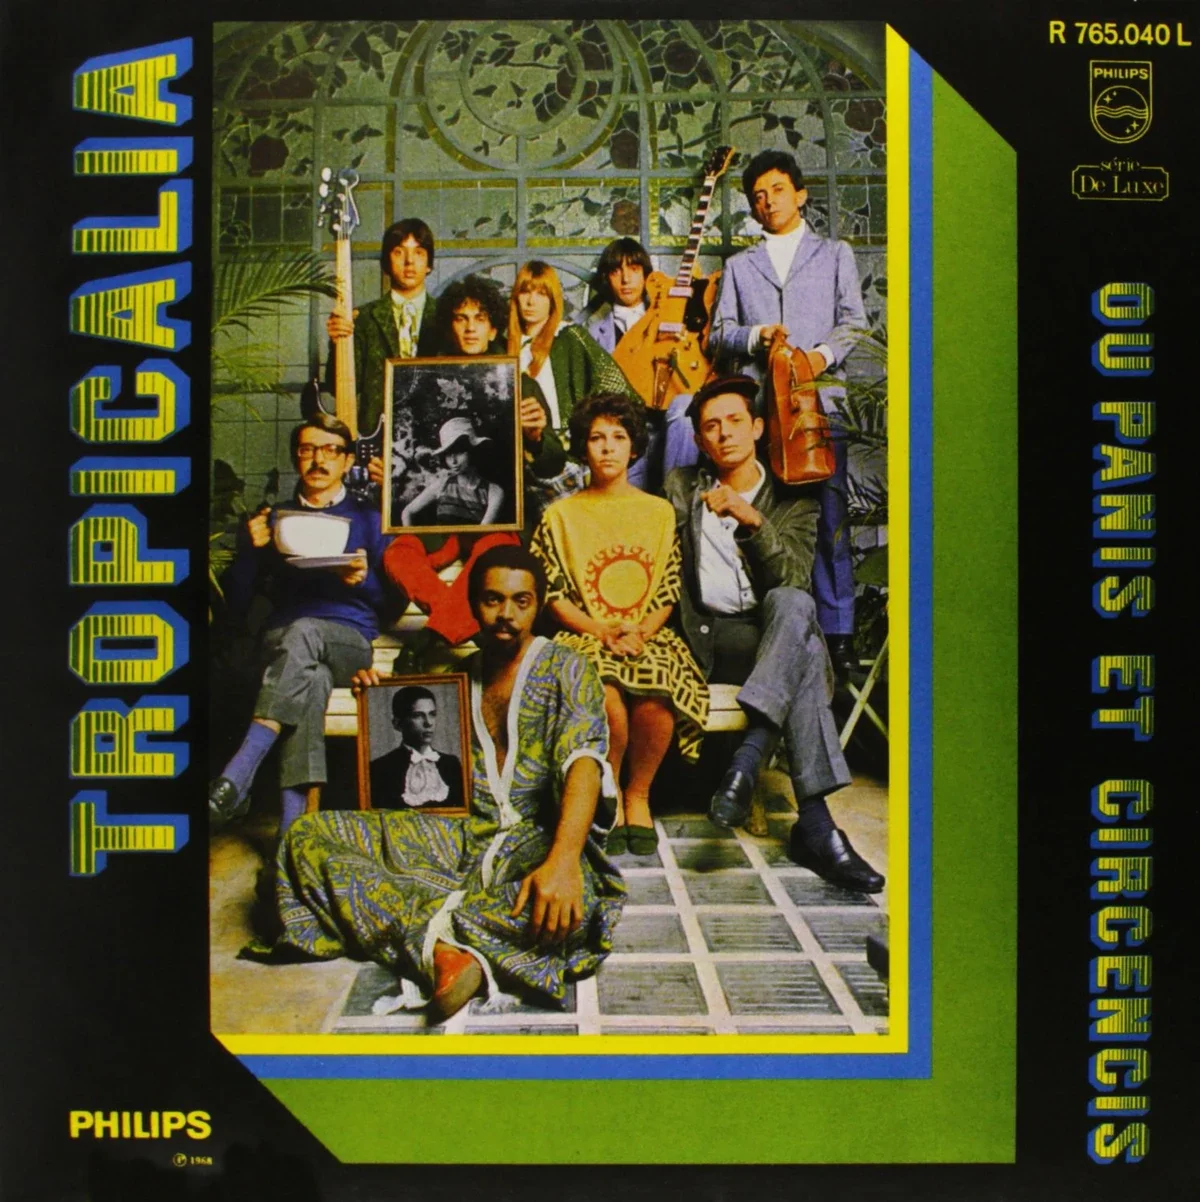 Cover of album, in green and black featuring a photo of people looking directly at the camera